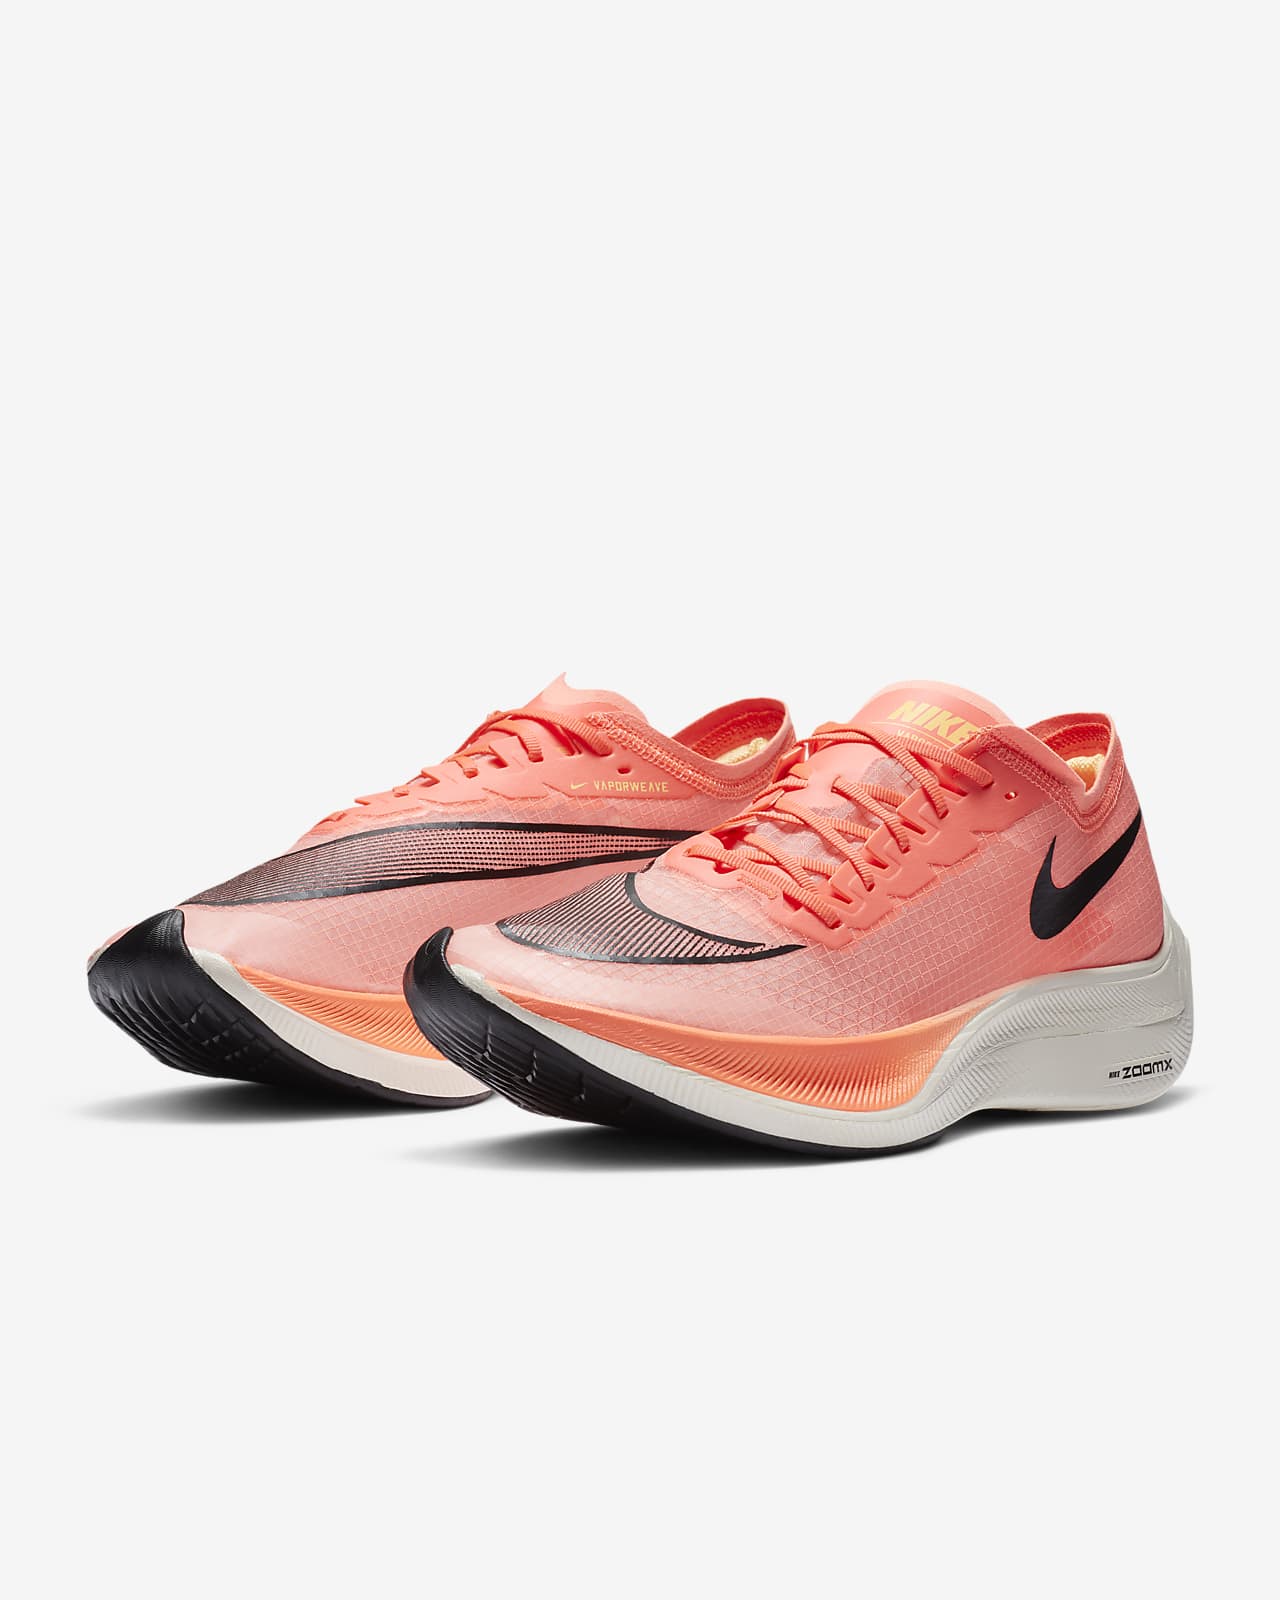 nike zoomx fly next